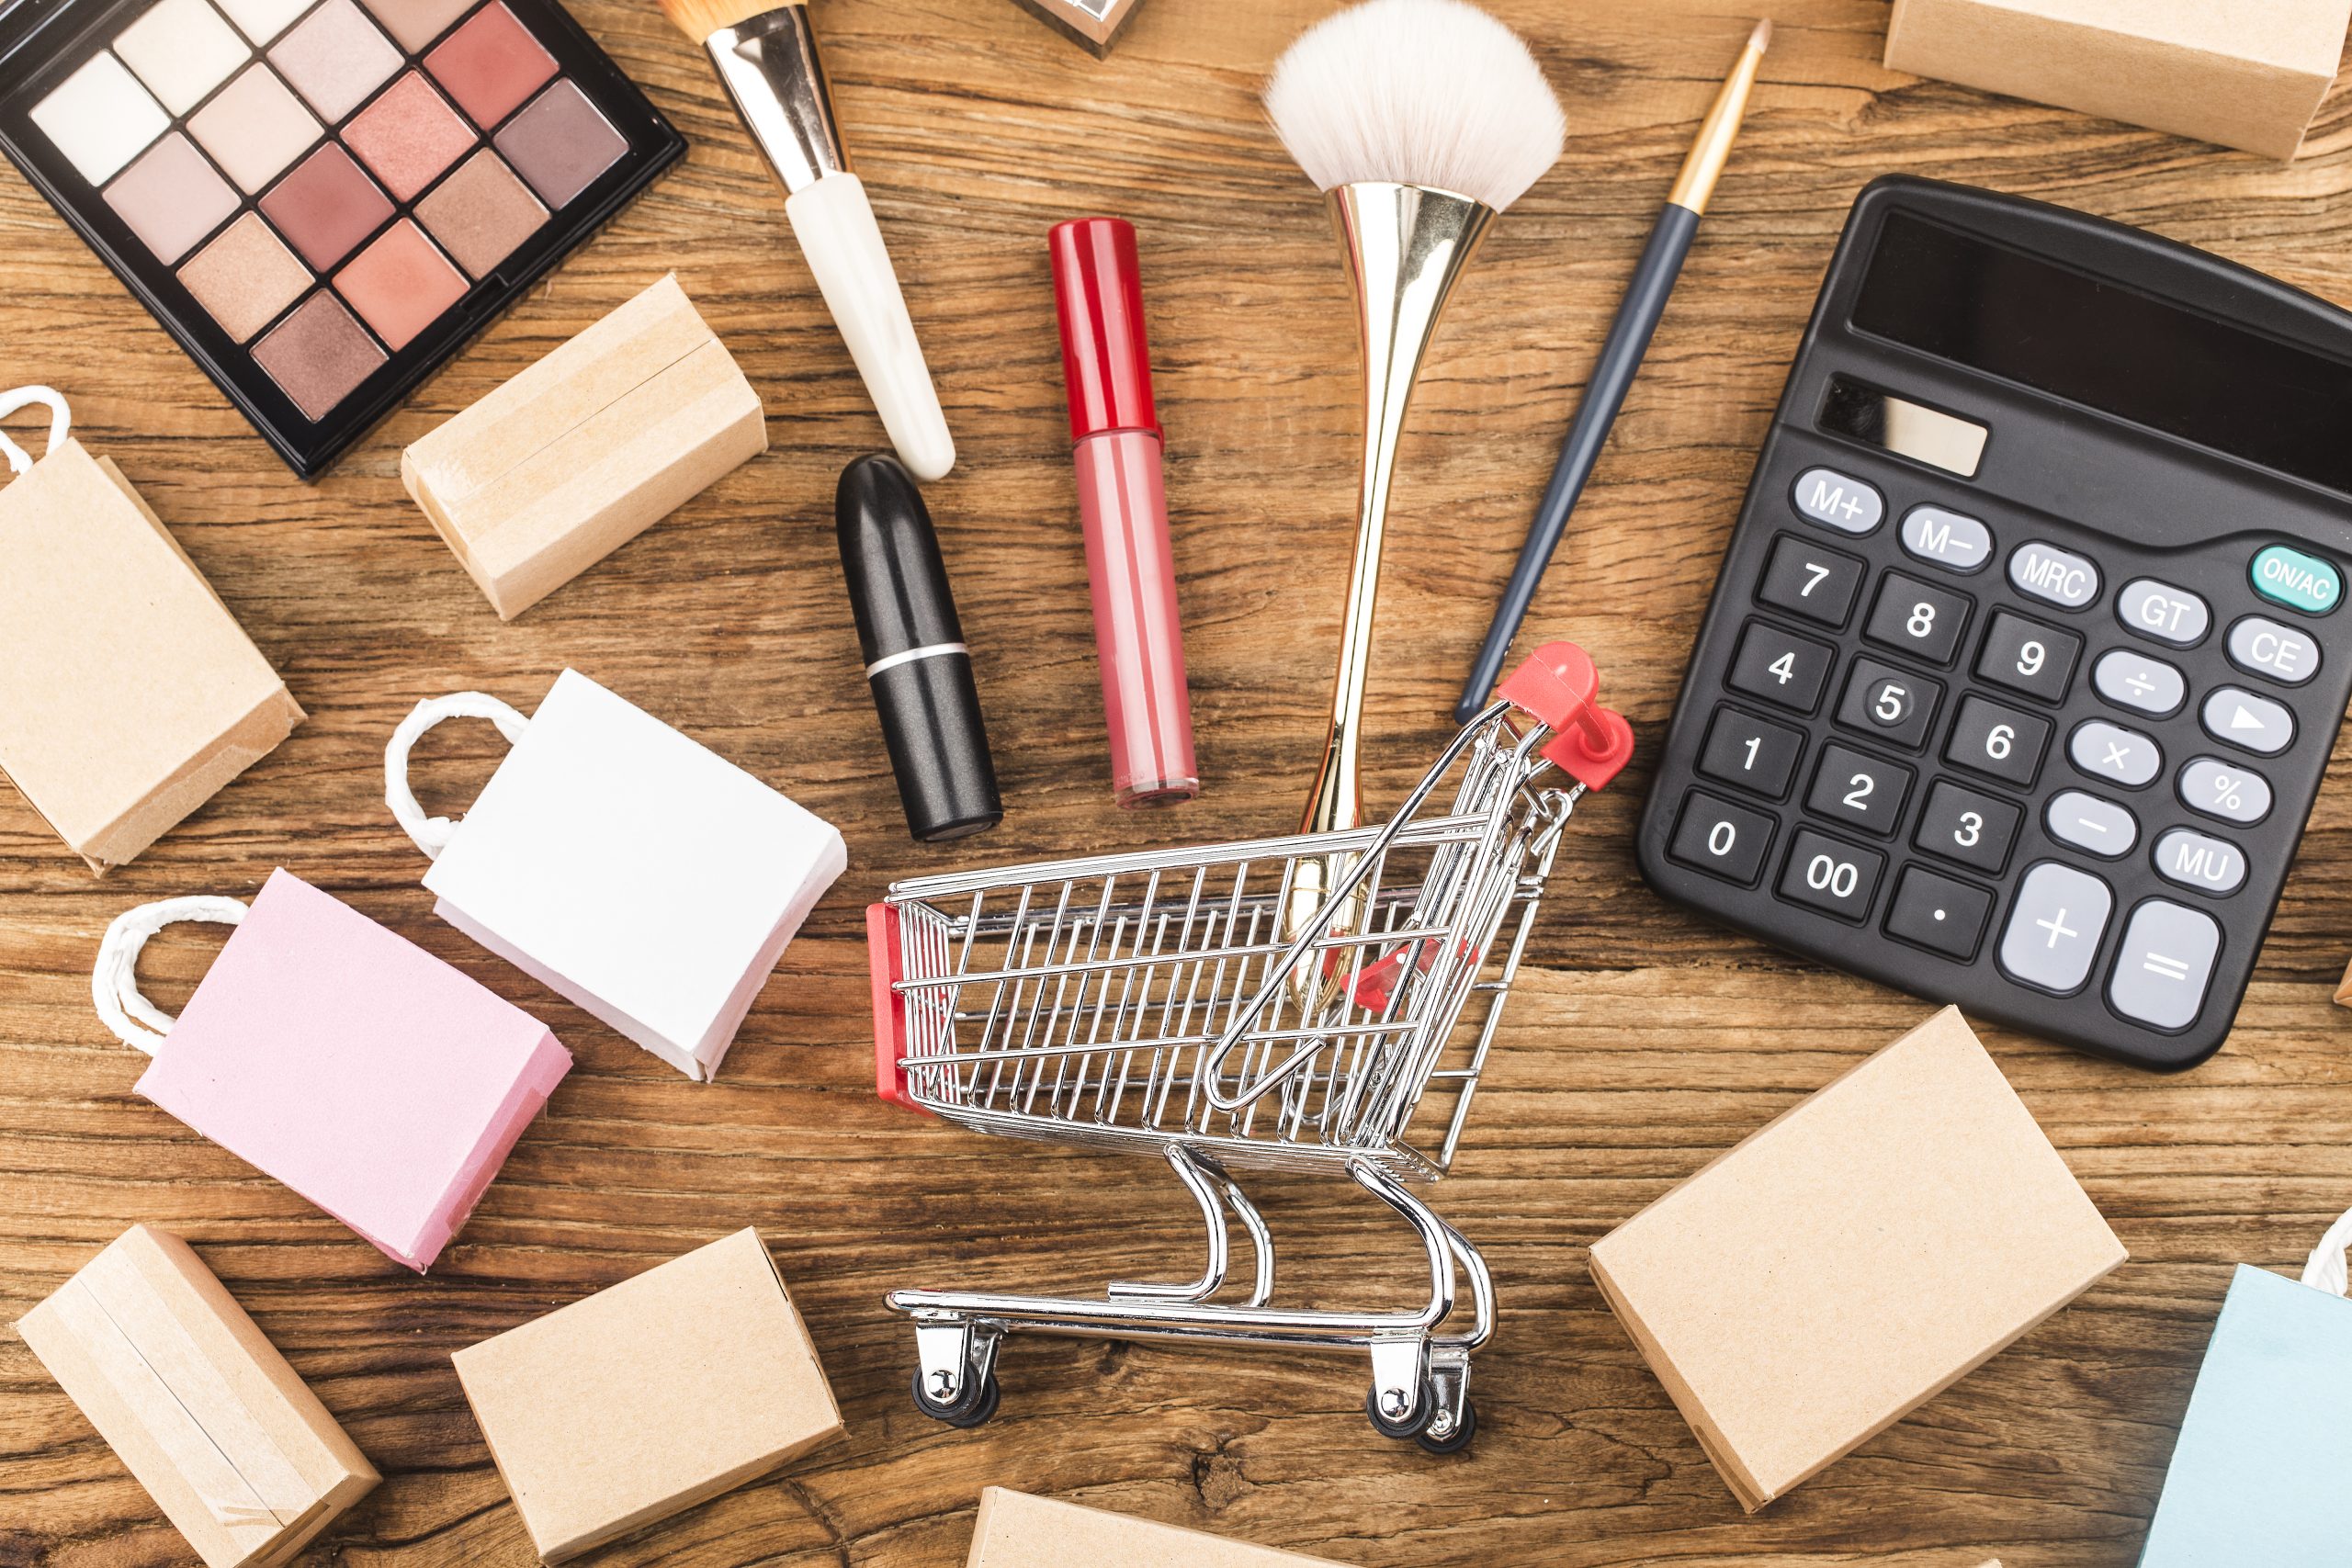 Terracor Business Solutions helps Alternative Beauty Services implement a Scalable B2B e-Commerce solution